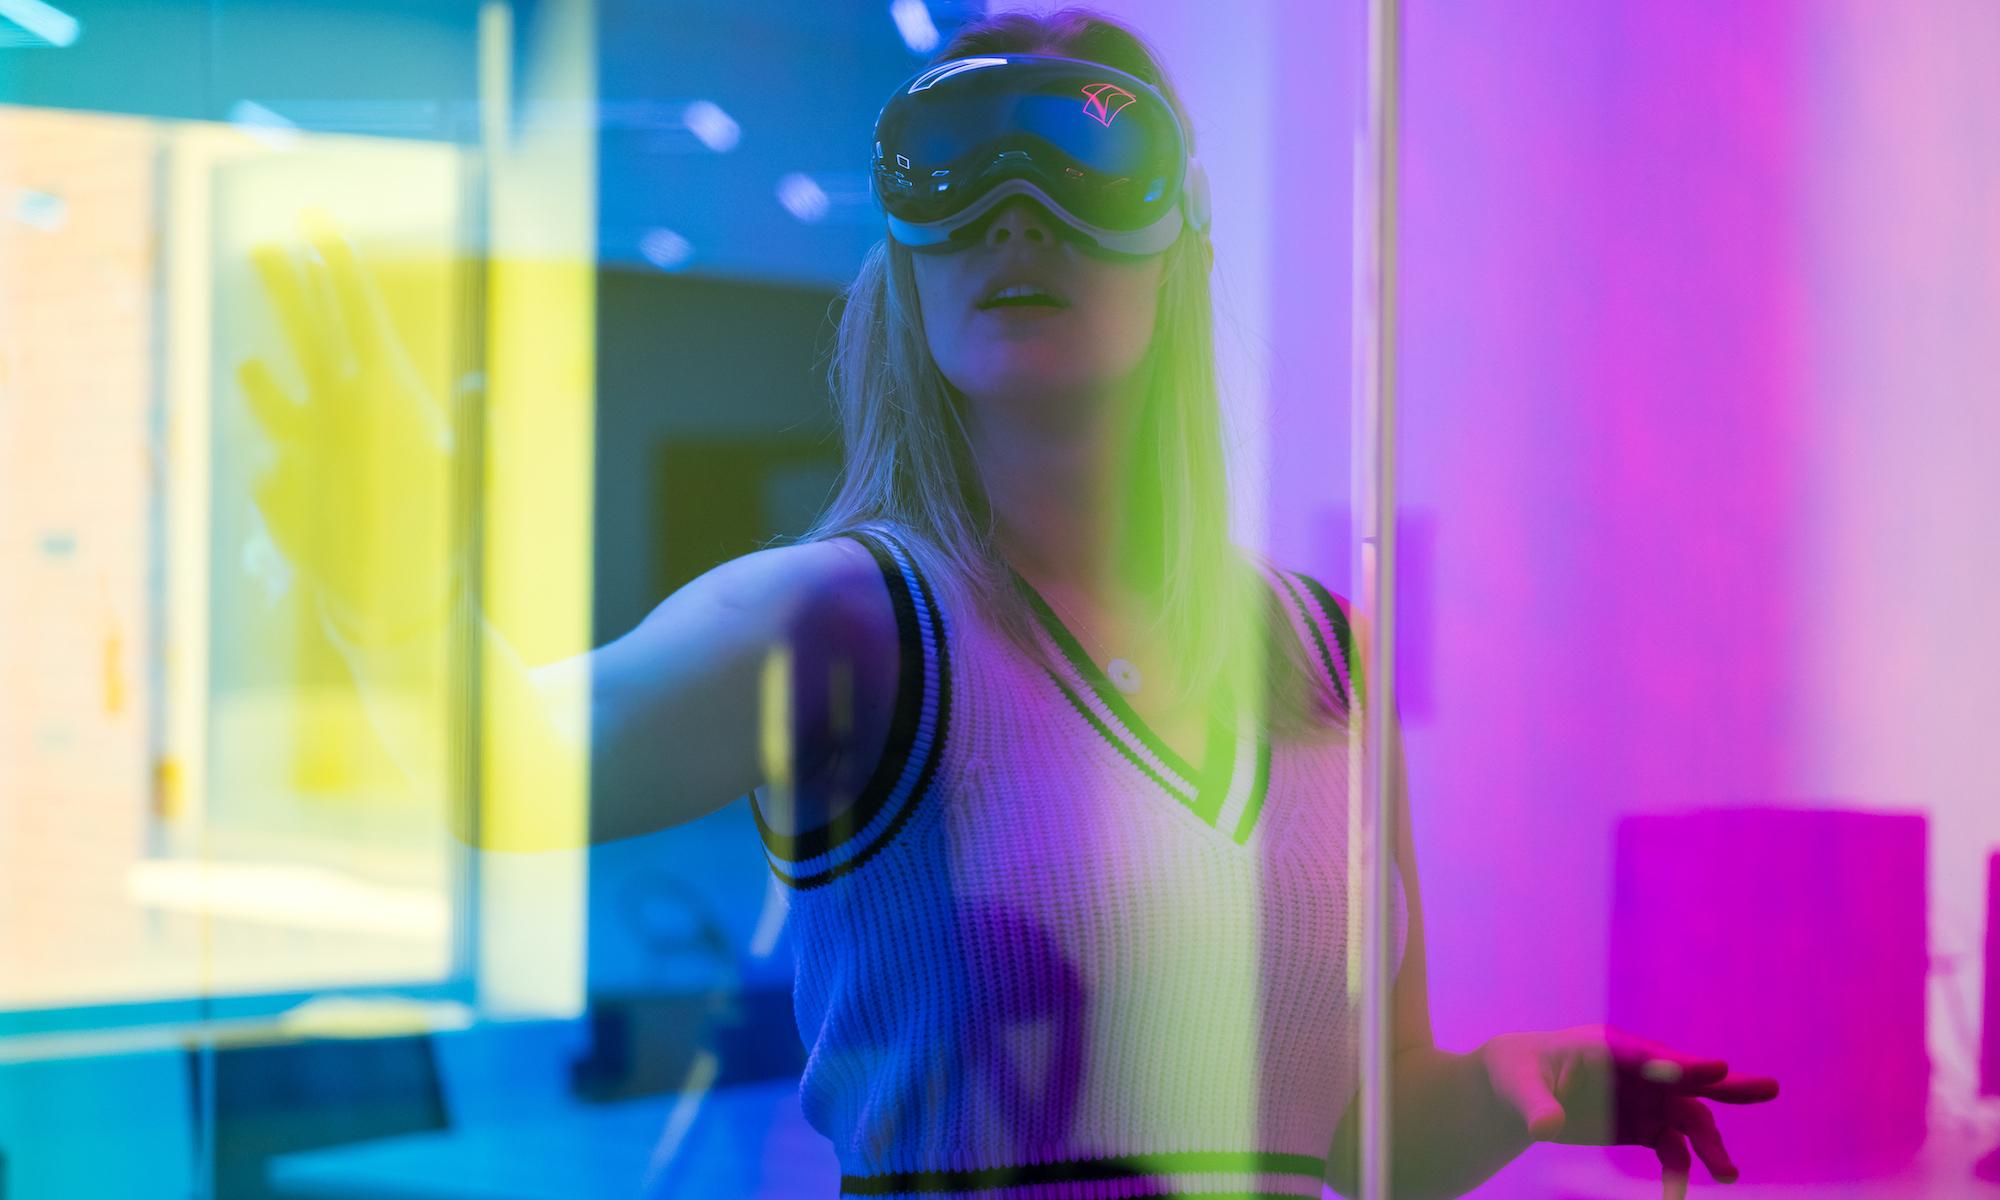 Student uses VR glasses and is pictured through a rainbow prism